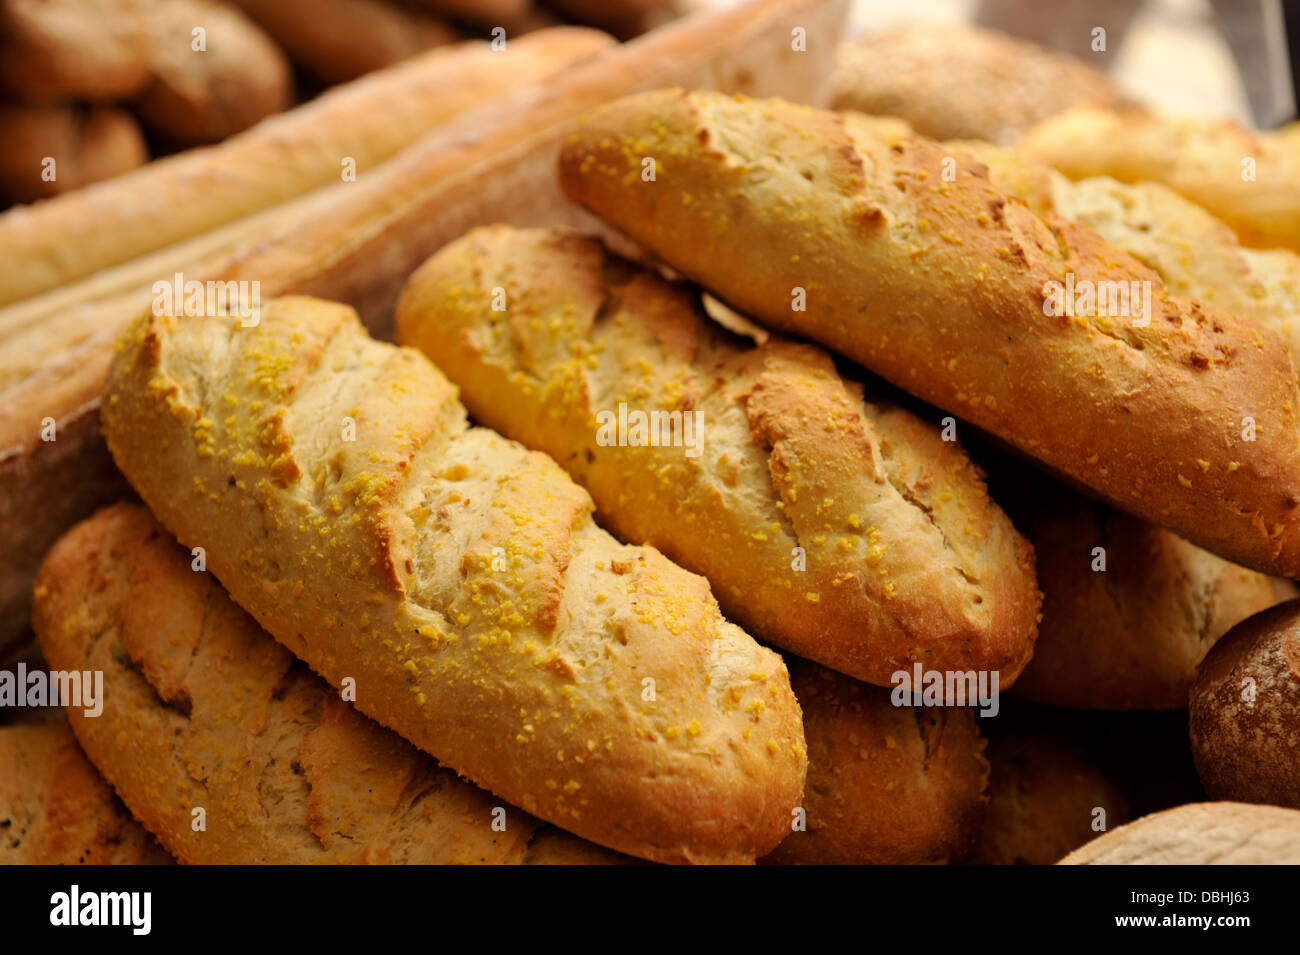 Loaves of fresh backed French bread stacked for sale Stock Photo